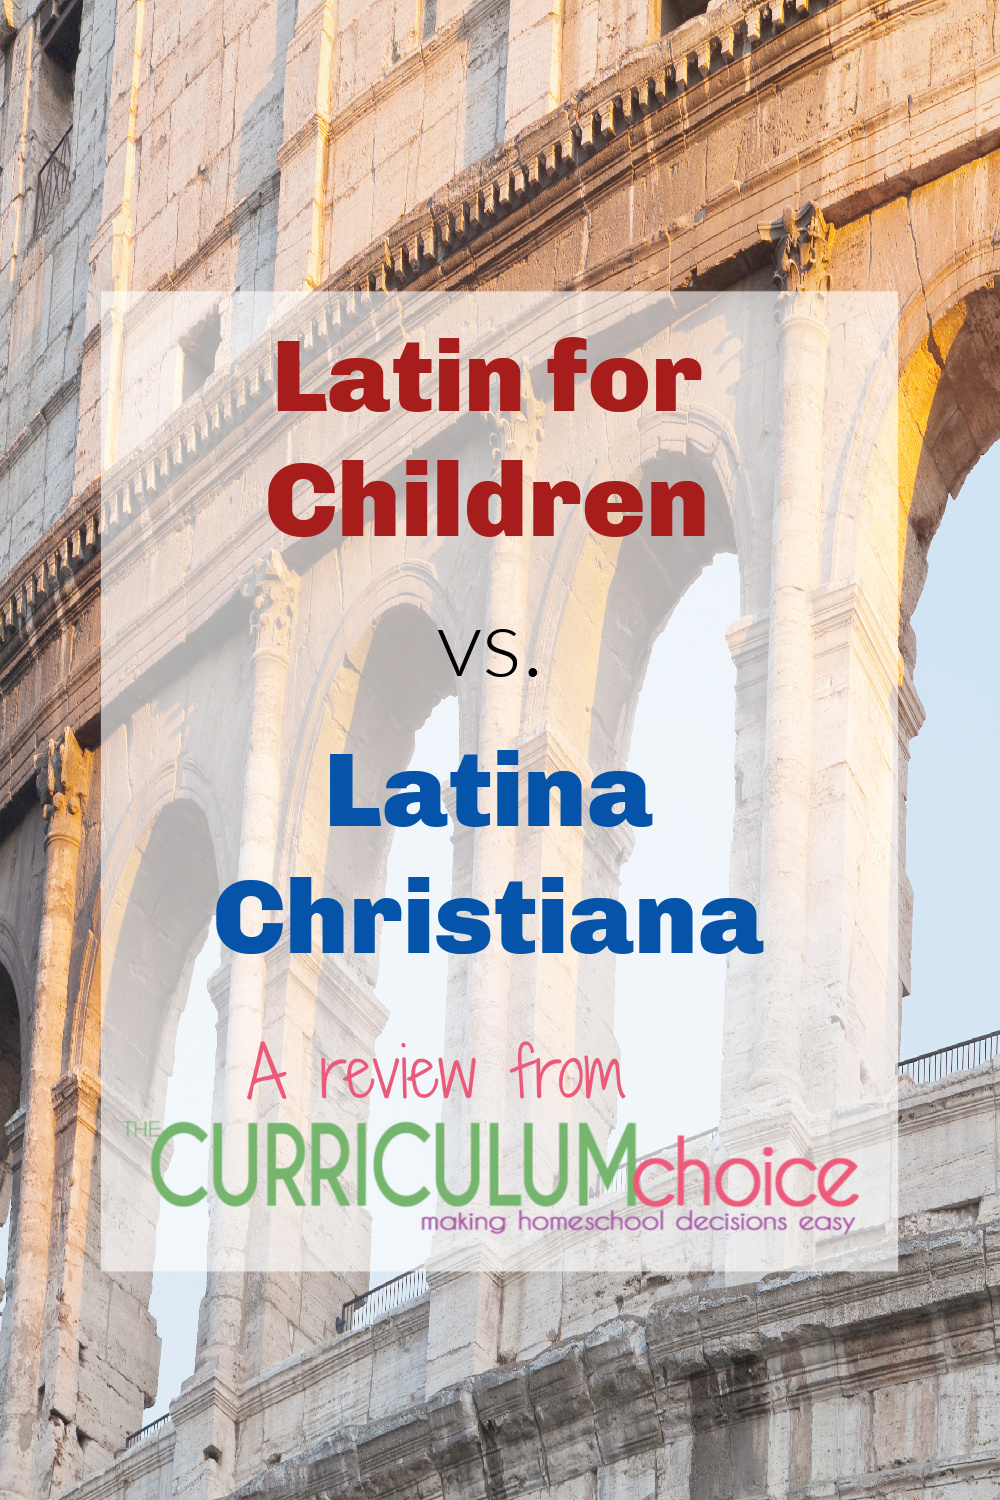 Take a look at Latin for Children side by side with Latina Christiana to compare their components and features. A review from The Curriculum Choice